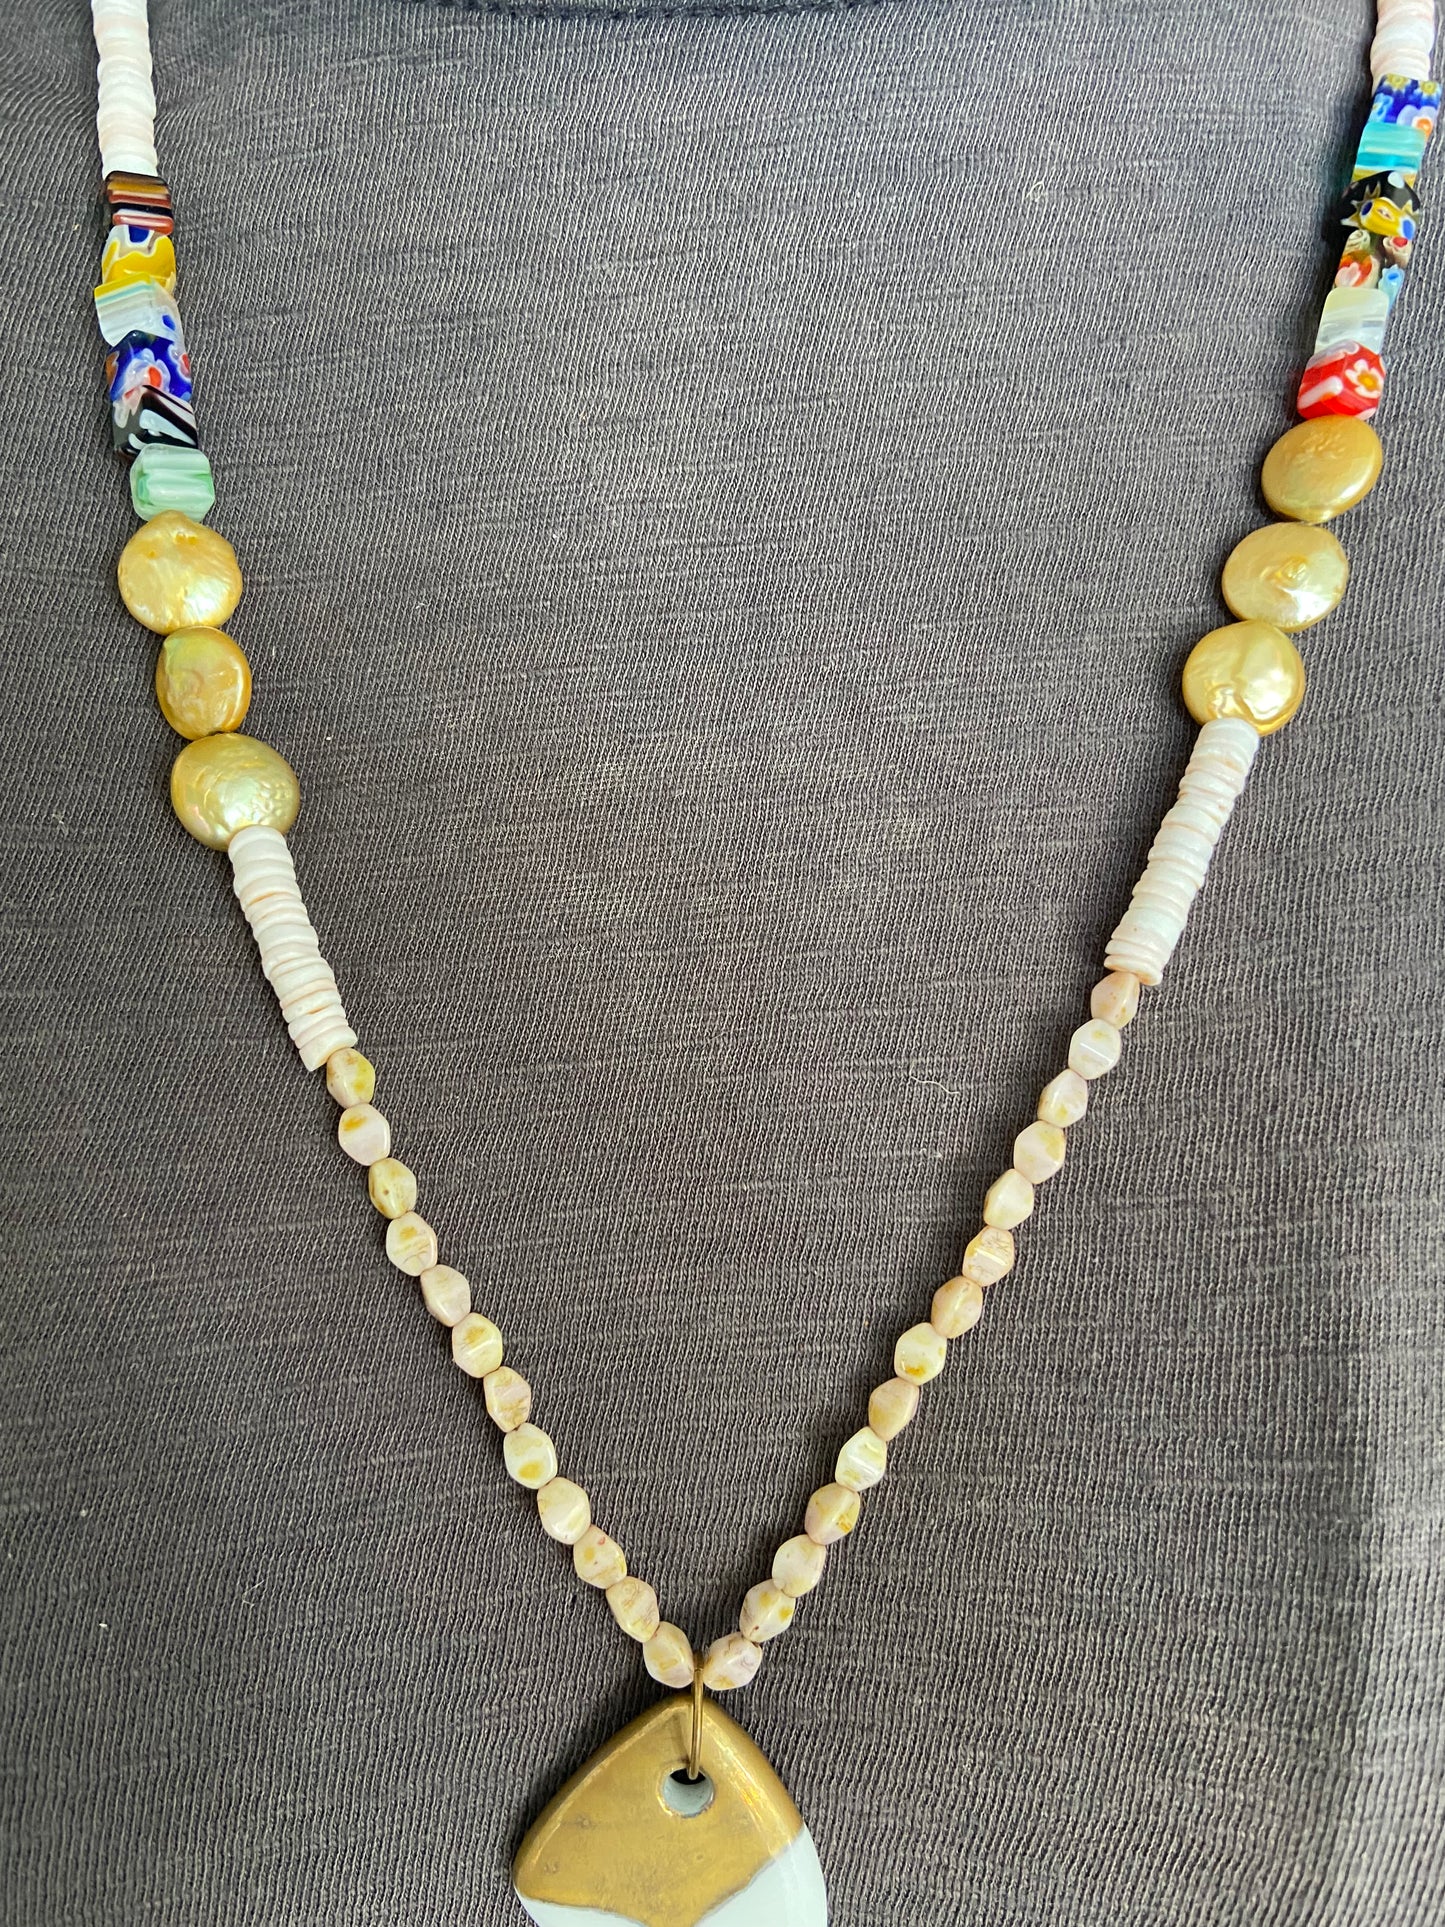 A gift, gift for mom, Coastal multi colored Necklace